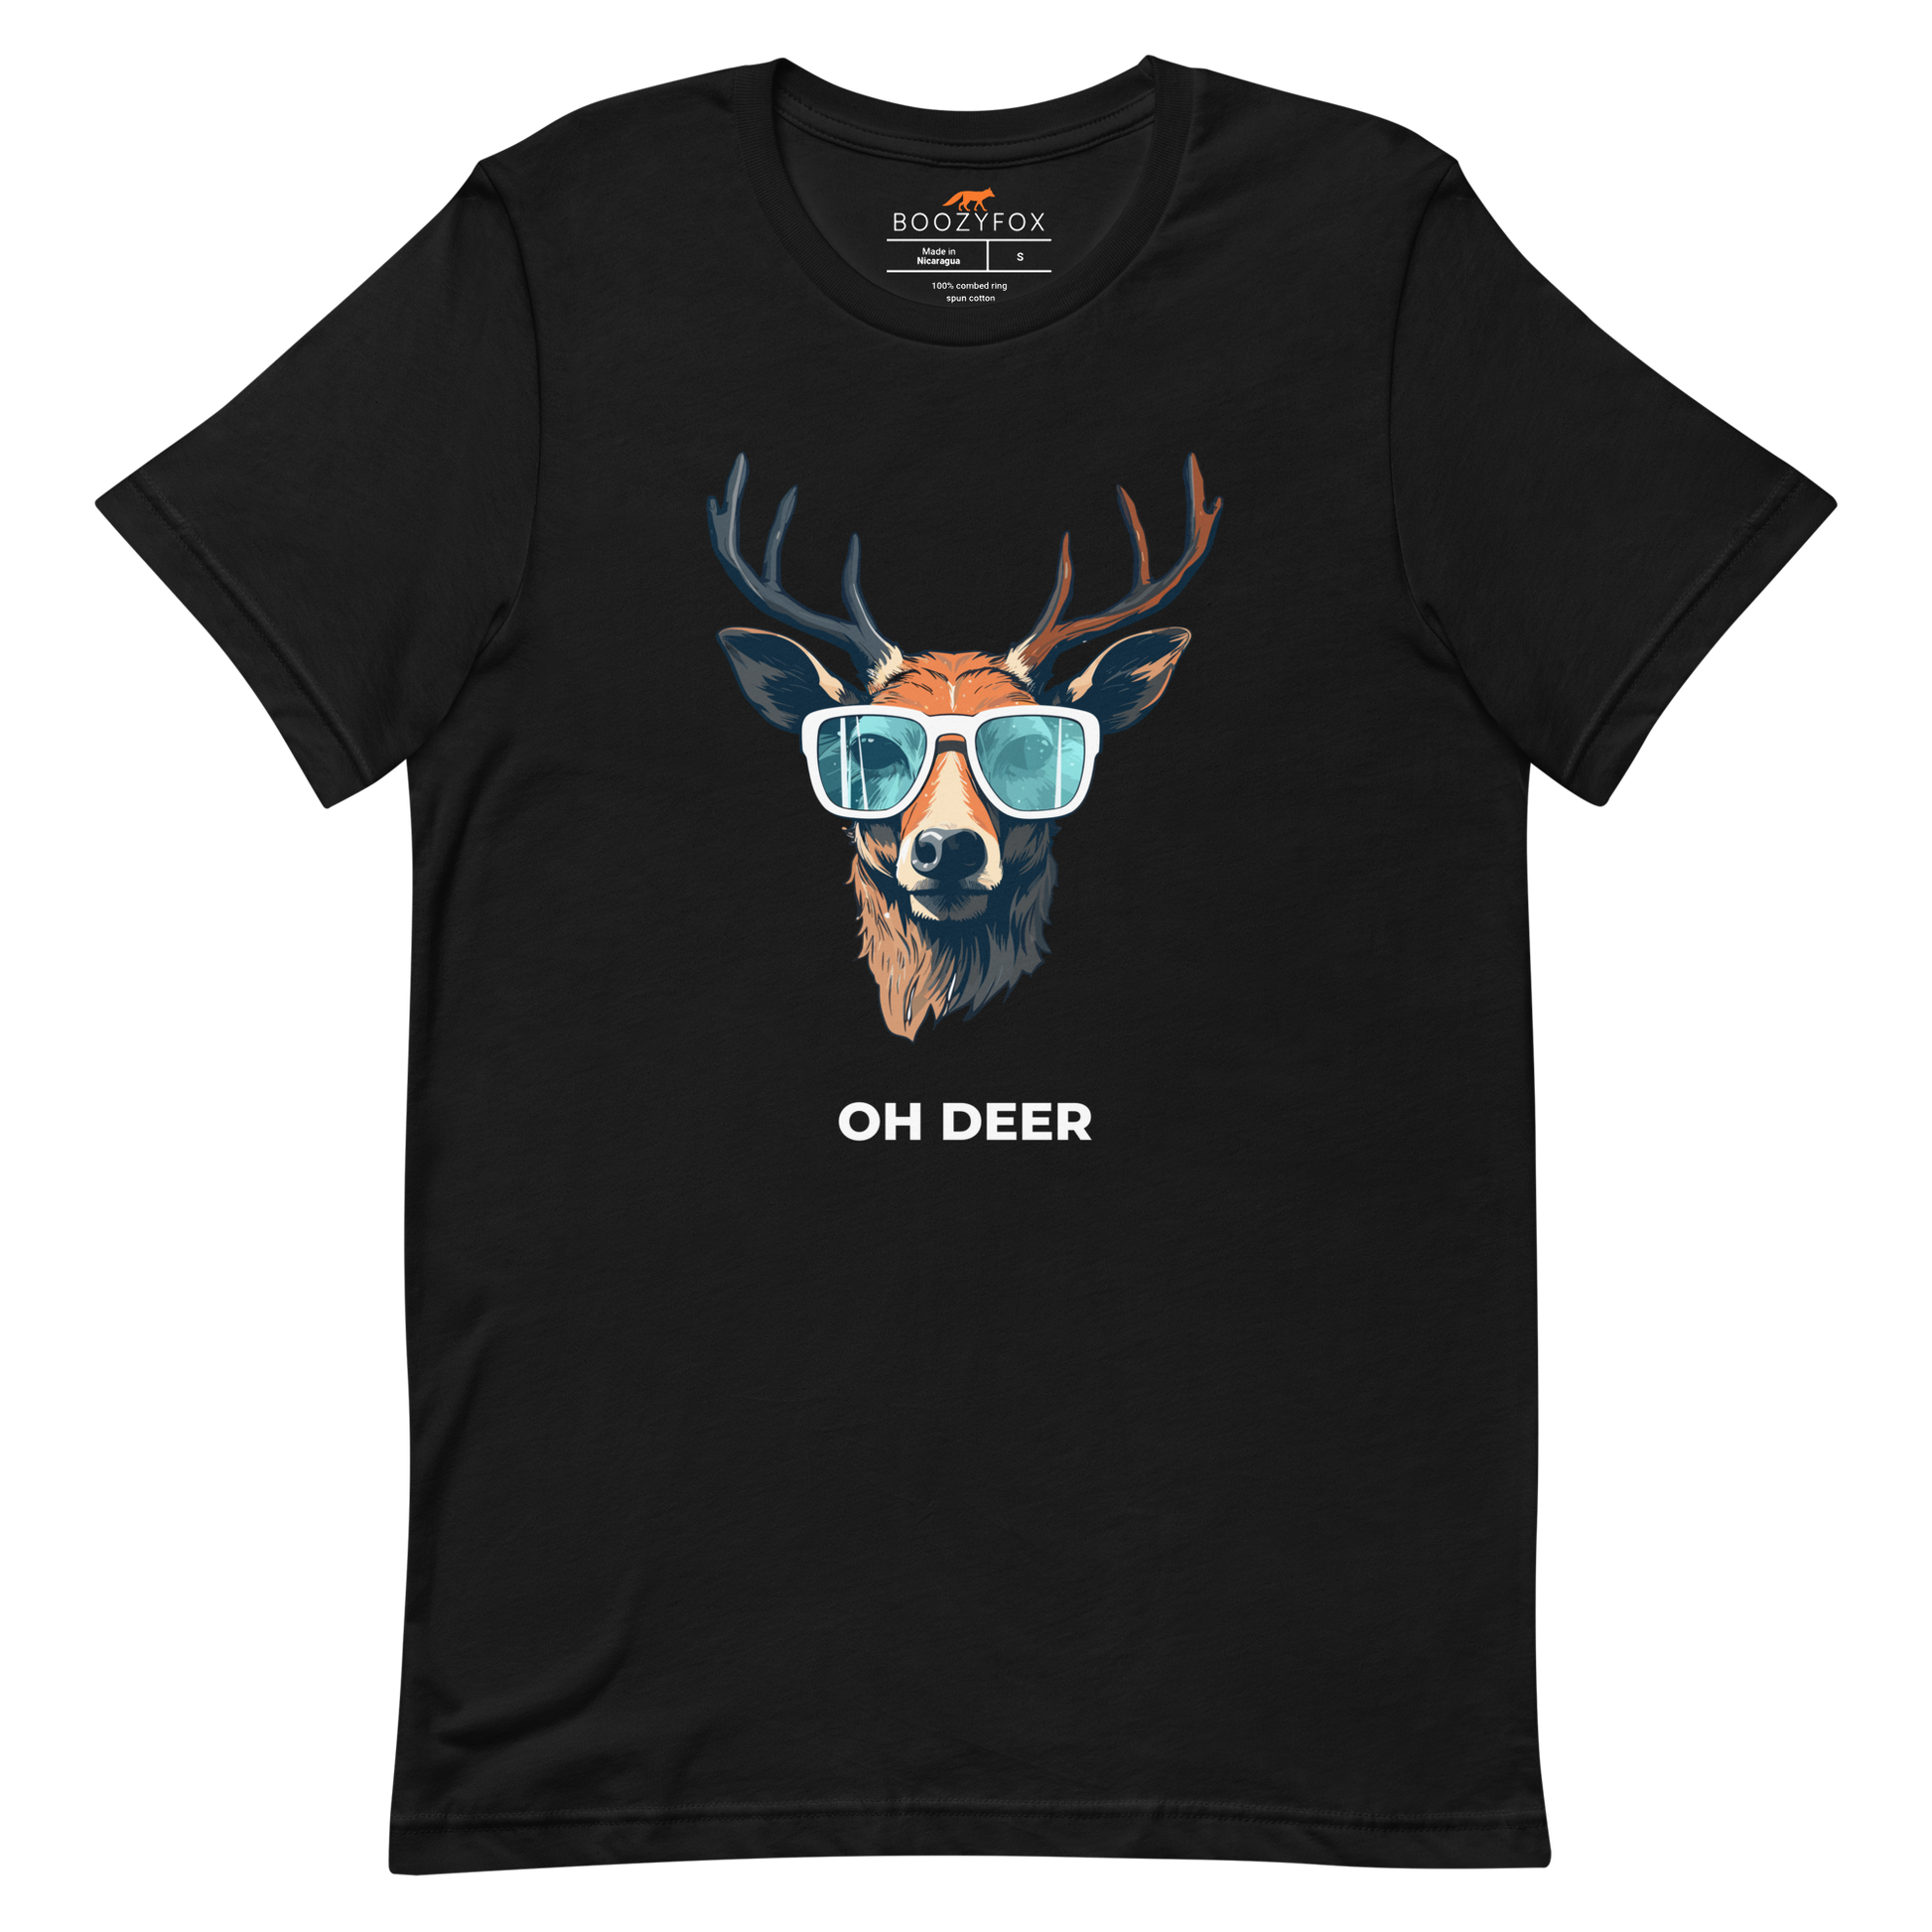 Black Premium Deer T-Shirt featuring a hilarious Oh Deer graphic on the chest - Funny Graphic Deer Tees - Boozy Fox